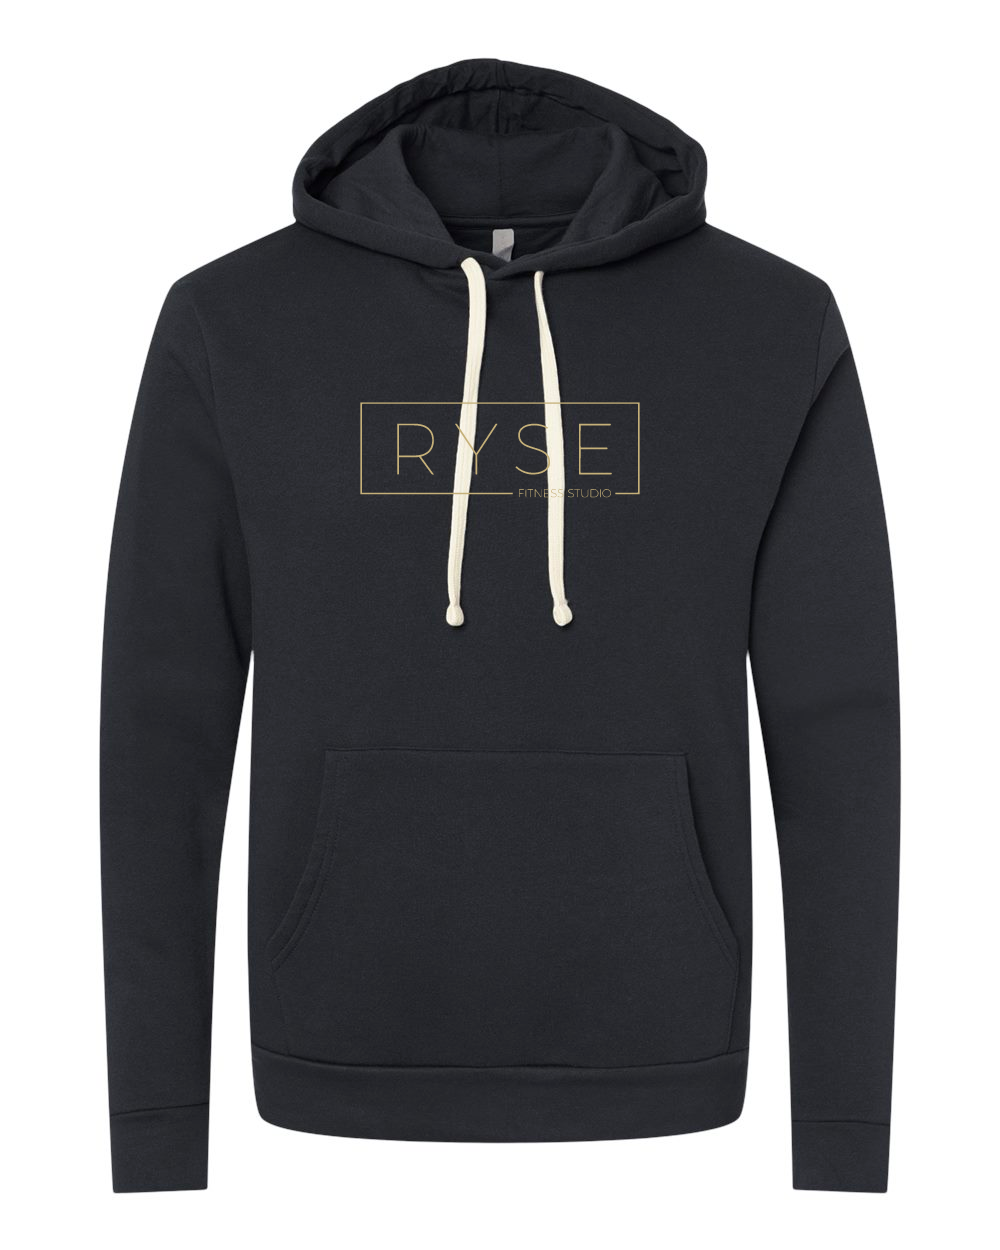 Ryse Fitness Hoodie + 1 Month Unlimited Pass